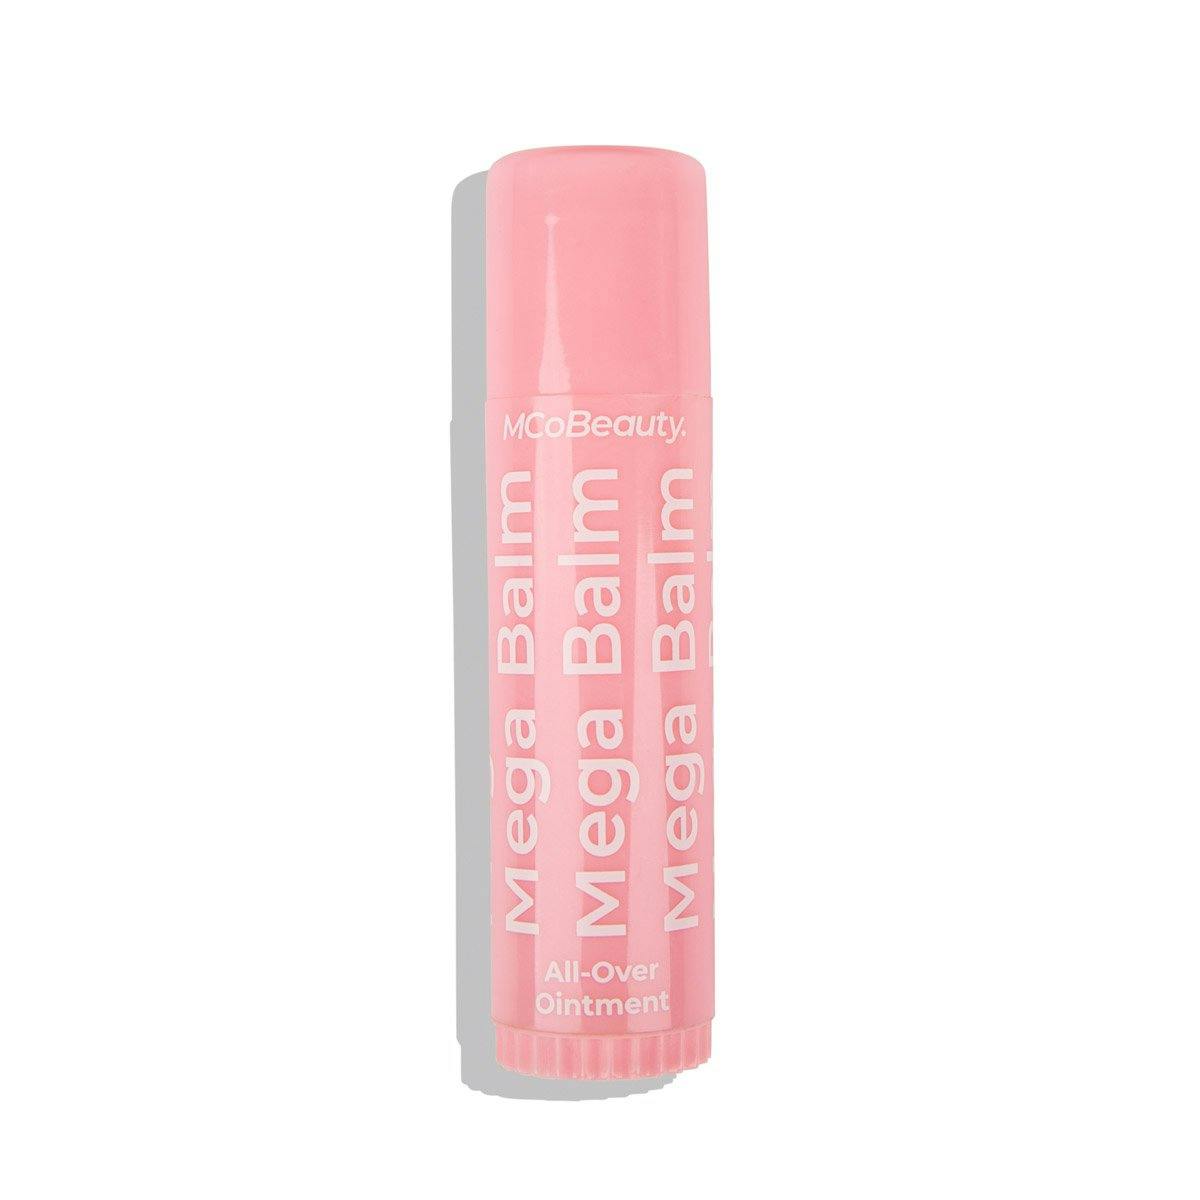 MCoBeauty Mega Balm All-Over Ointment